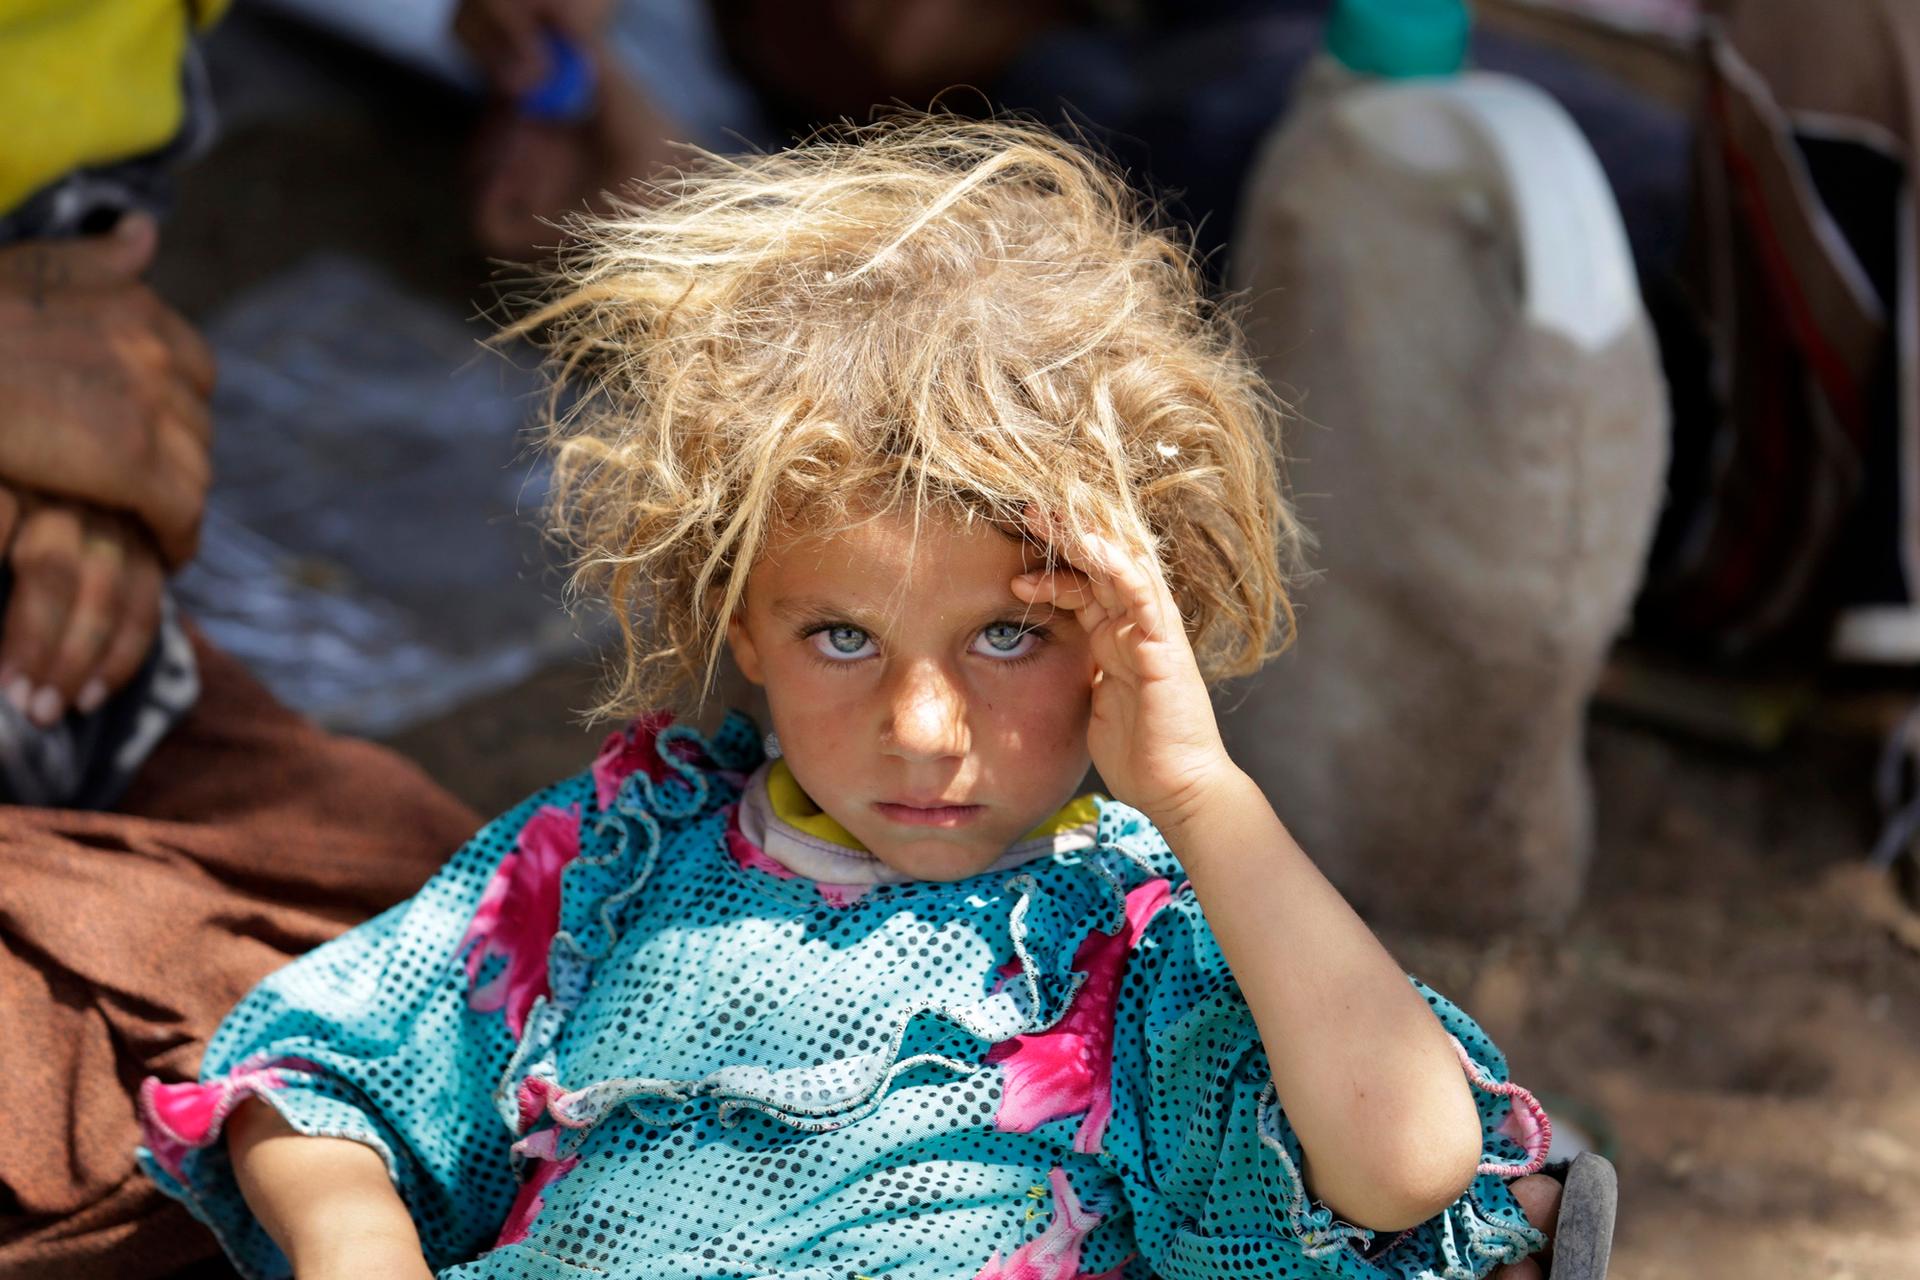 An Iraqi girl from the minority Yazidi sect, after fleeing violence in Sinjar, rests at the Iraqi-Syrian border crossing in Fishkhabour on Aug. 13, 2014.